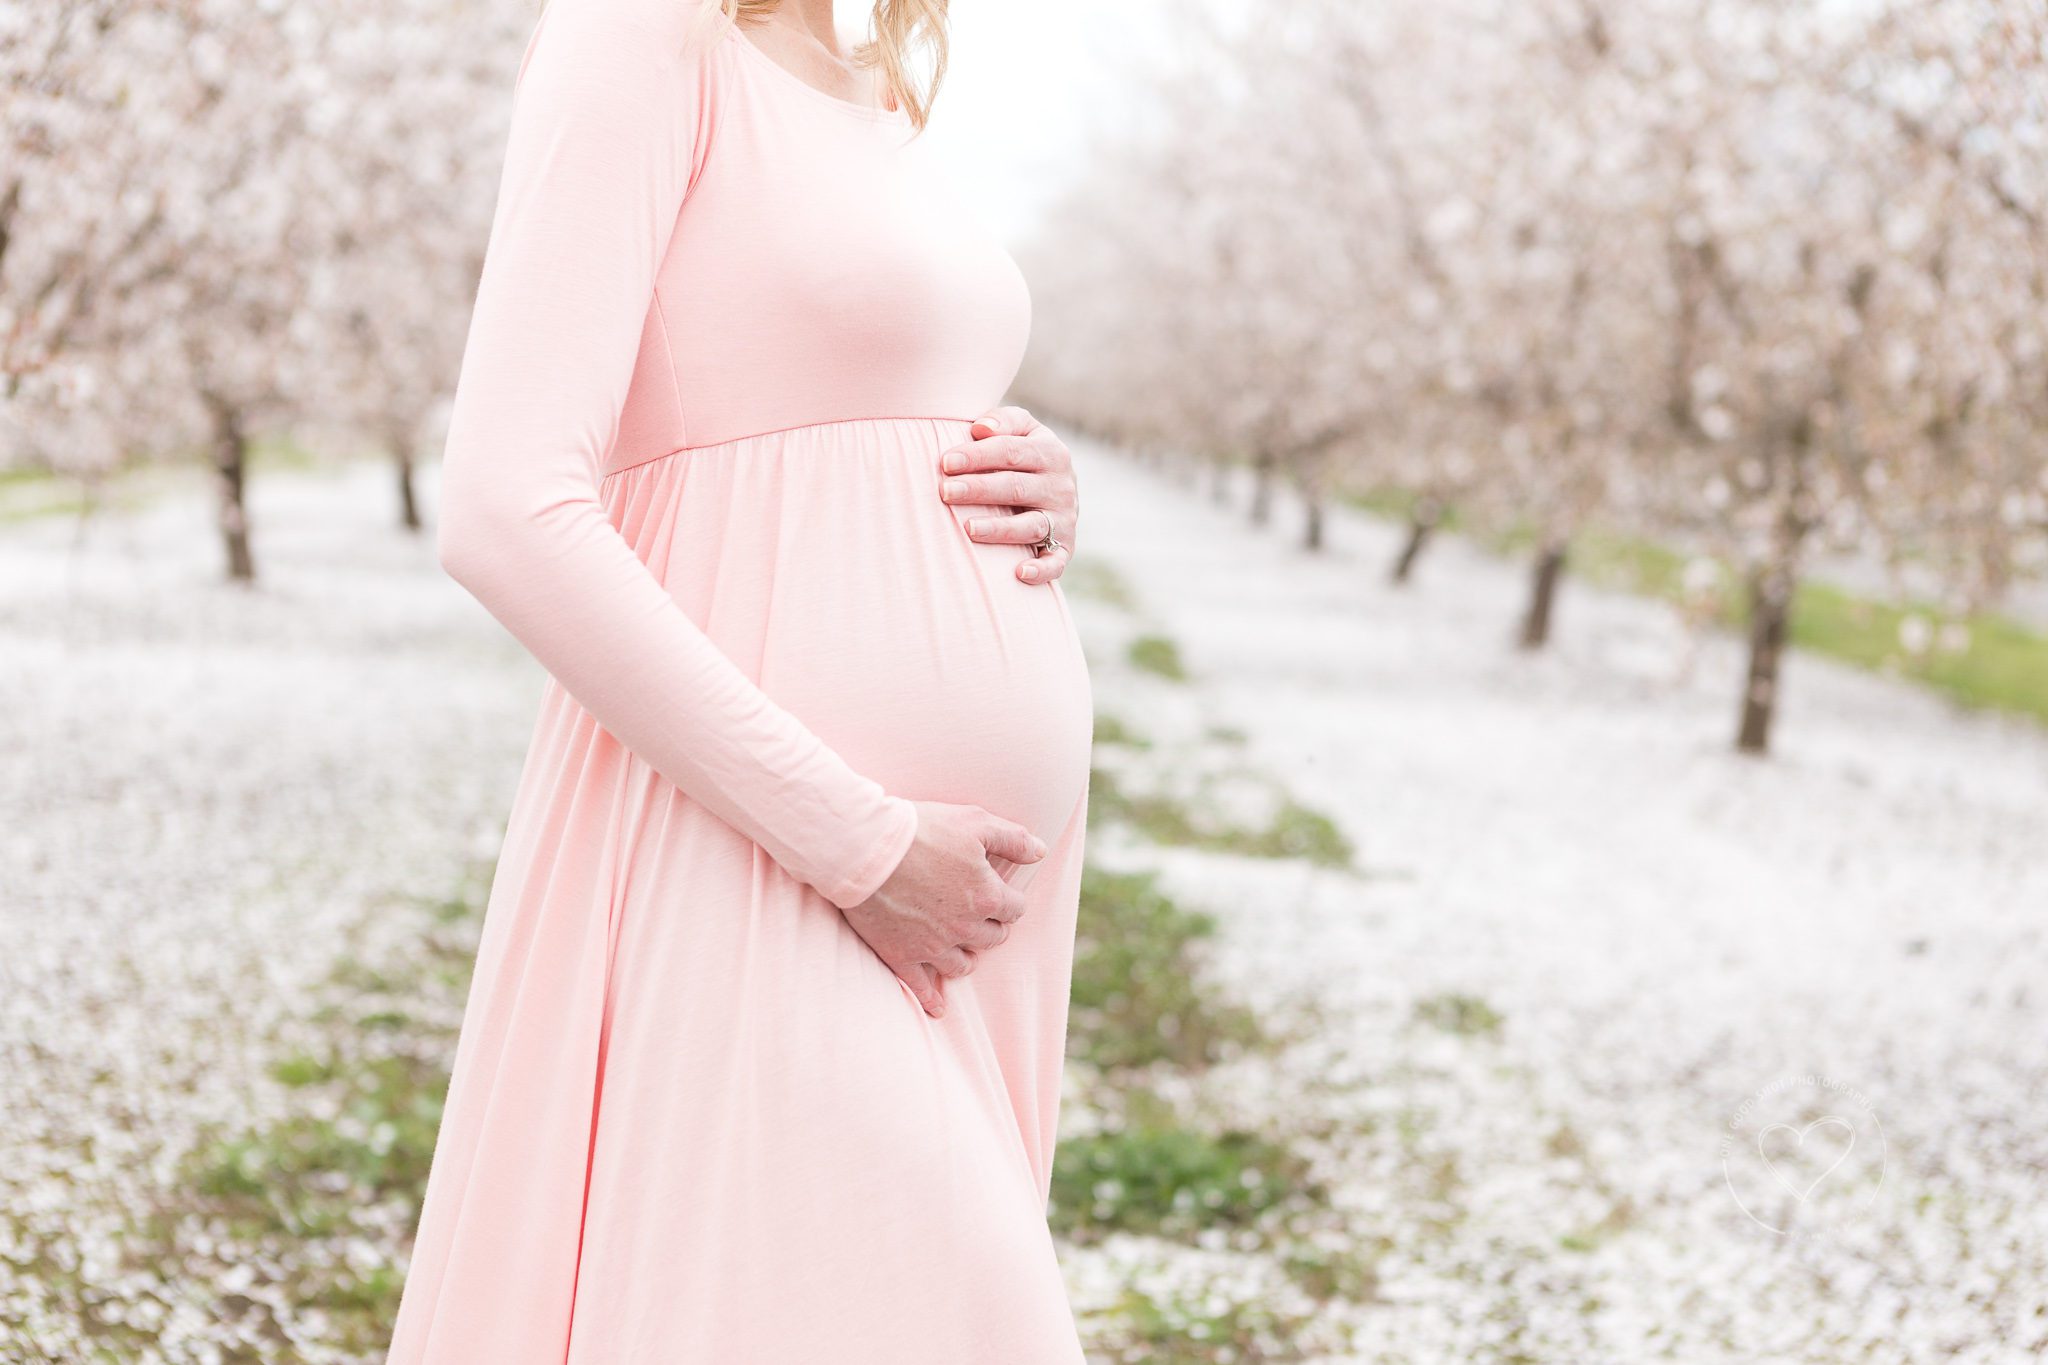 Baby bump, pregnancy, maternity session, pink maternity dress, blossoms